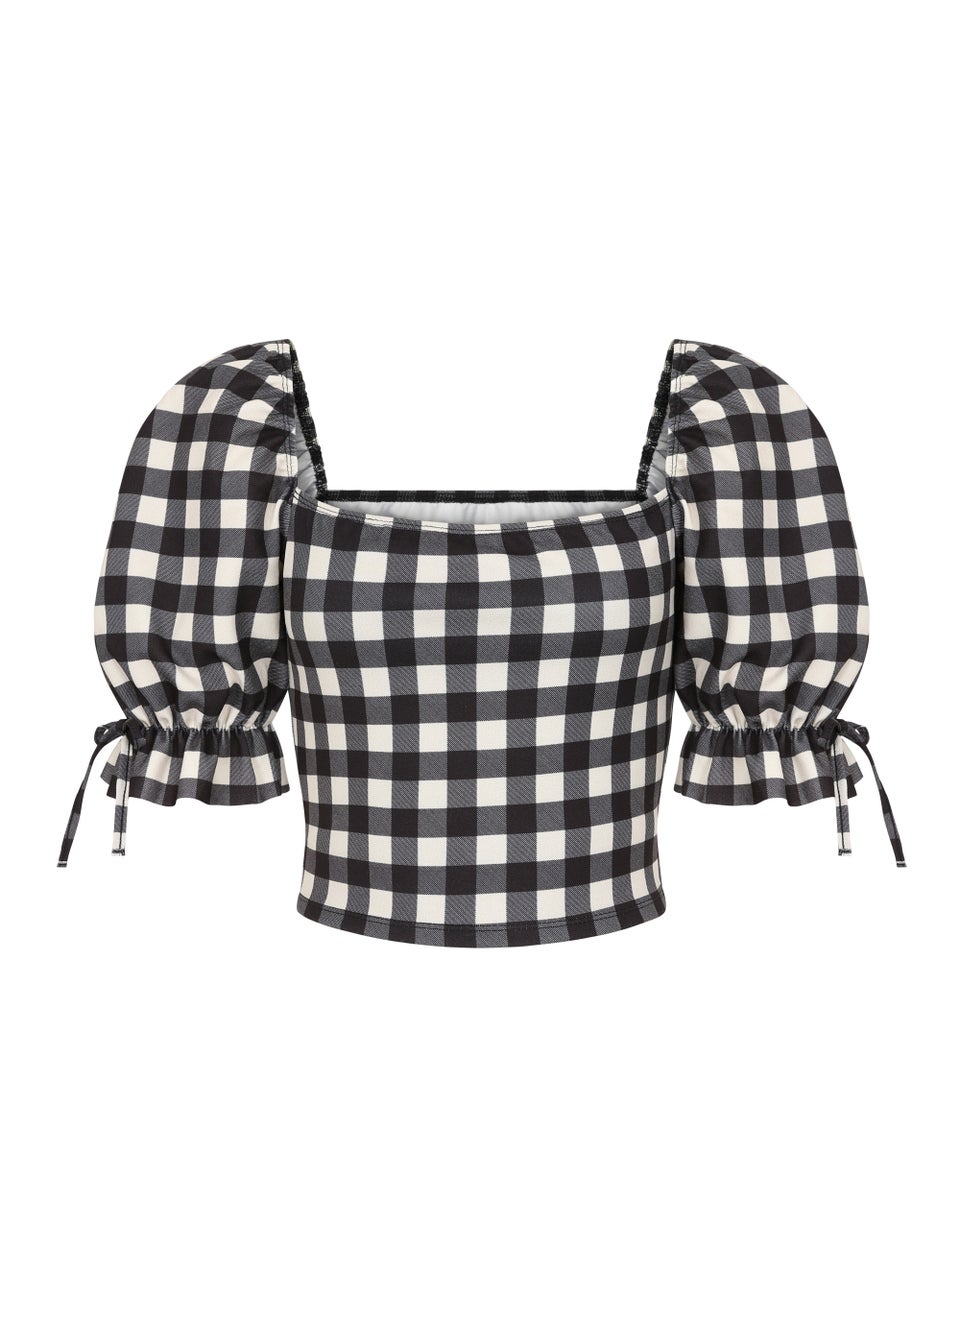 Girls on Film by Dani Dyer Black Gingham Co-Ord Top